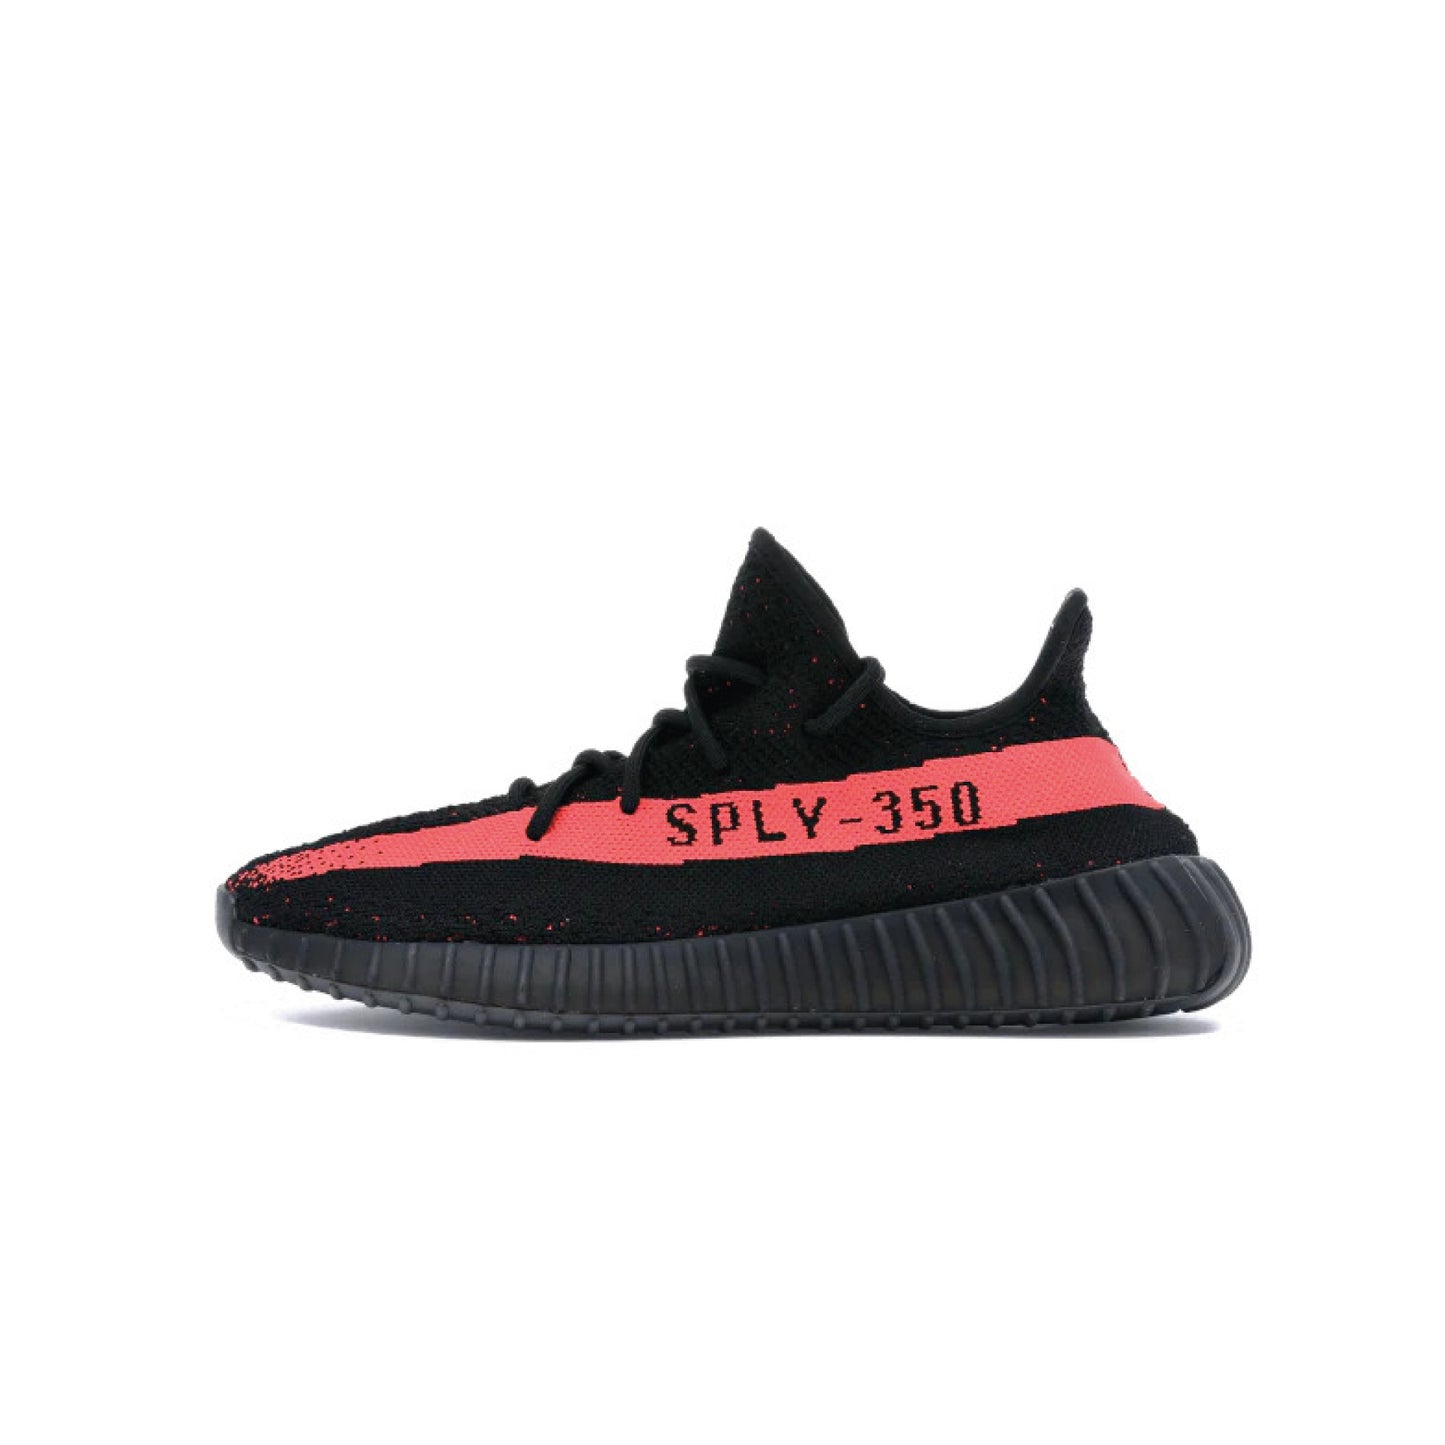 Adidas Yeezy Boost 350 V2 Core Black Red - 48h